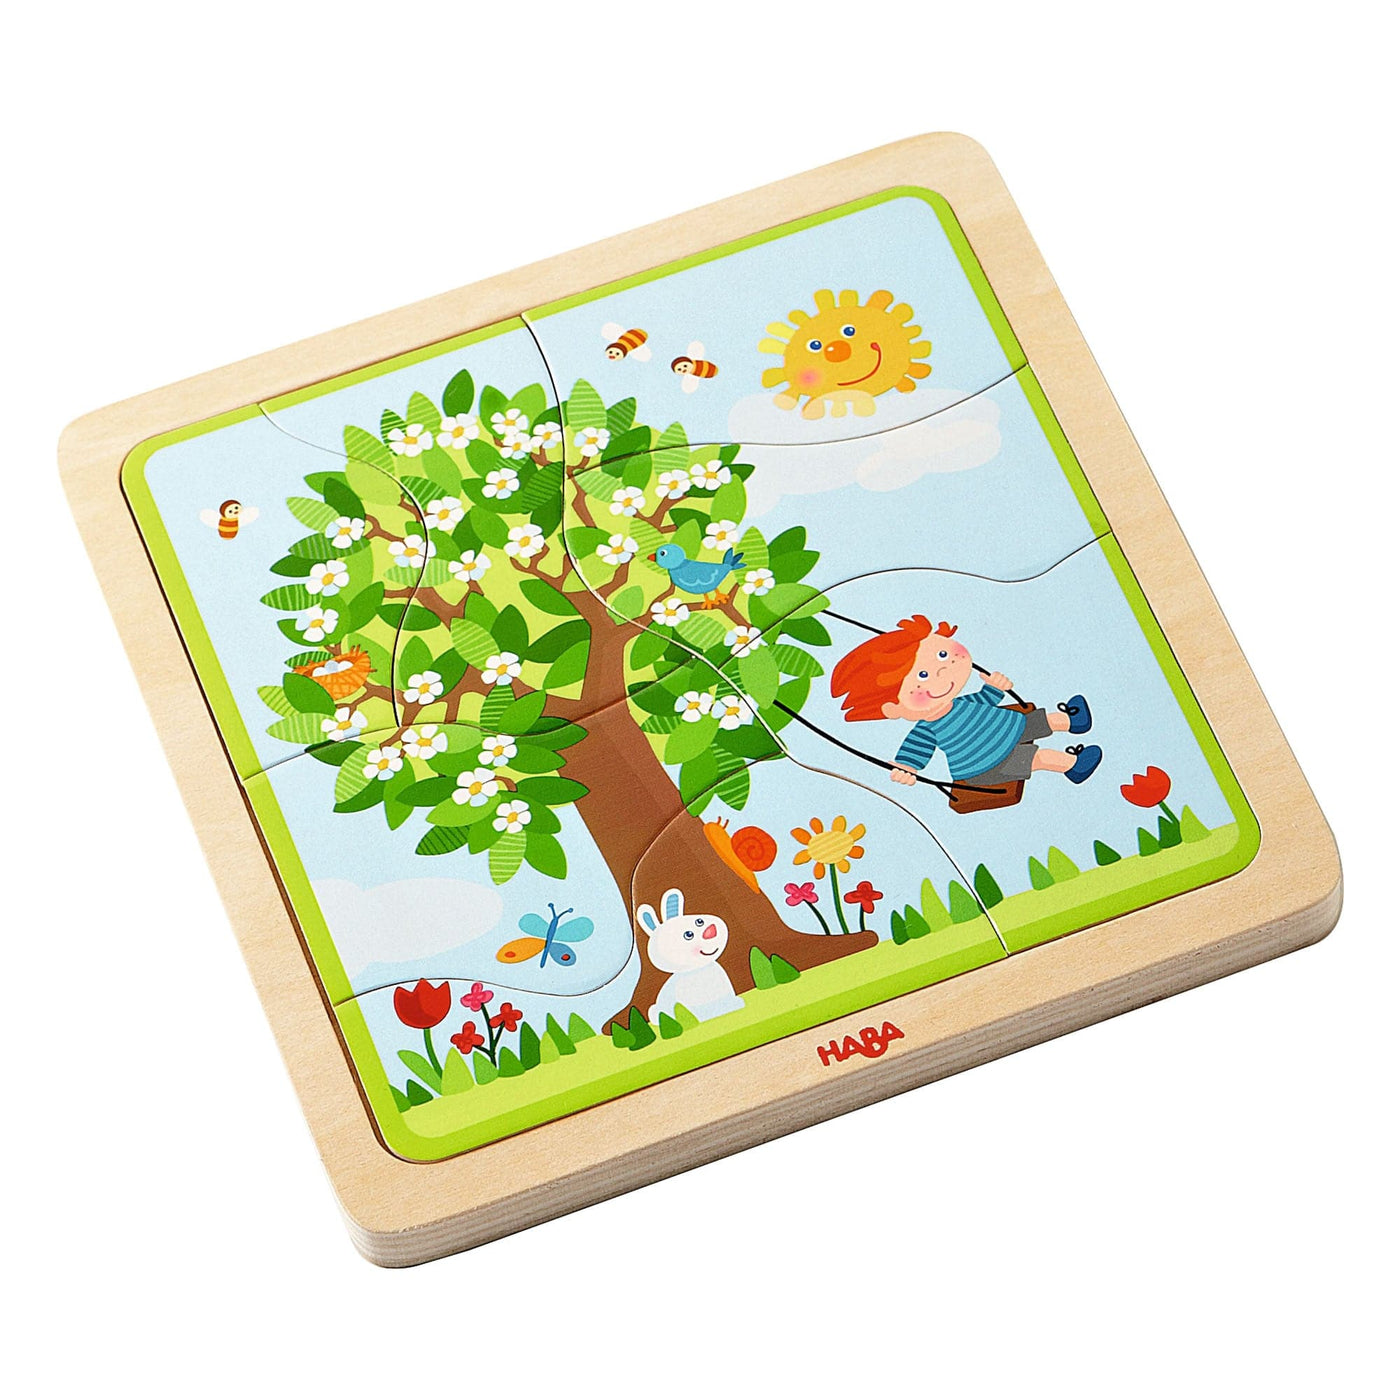 My Time of The Year 4-in-1 Wooden Puzzle - HABA USA